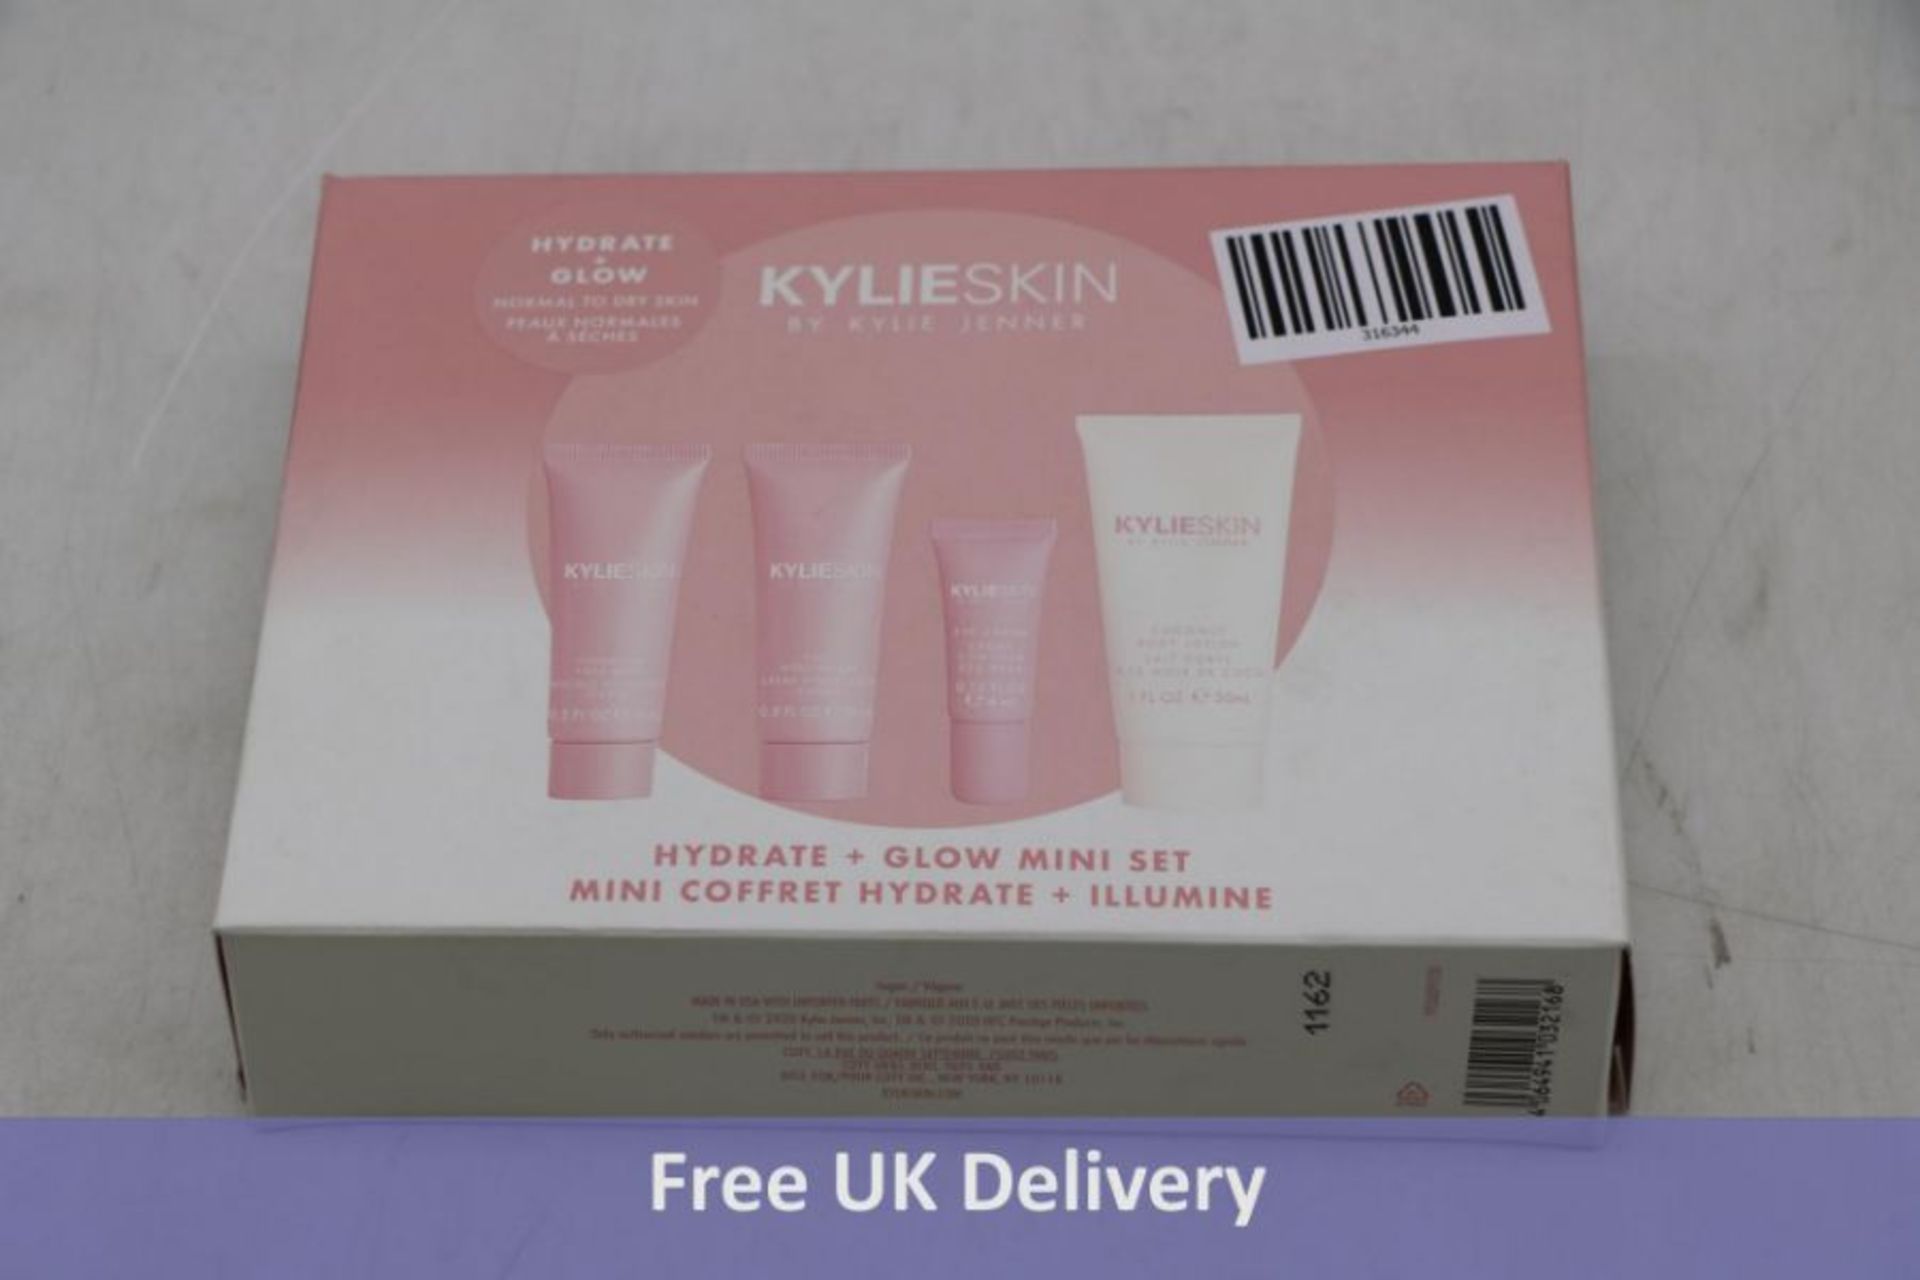 Four items of Kylieskin Beauty Products to include 1x Hydrate, Glow Mini Set, 1x Kylie Jenner Matte